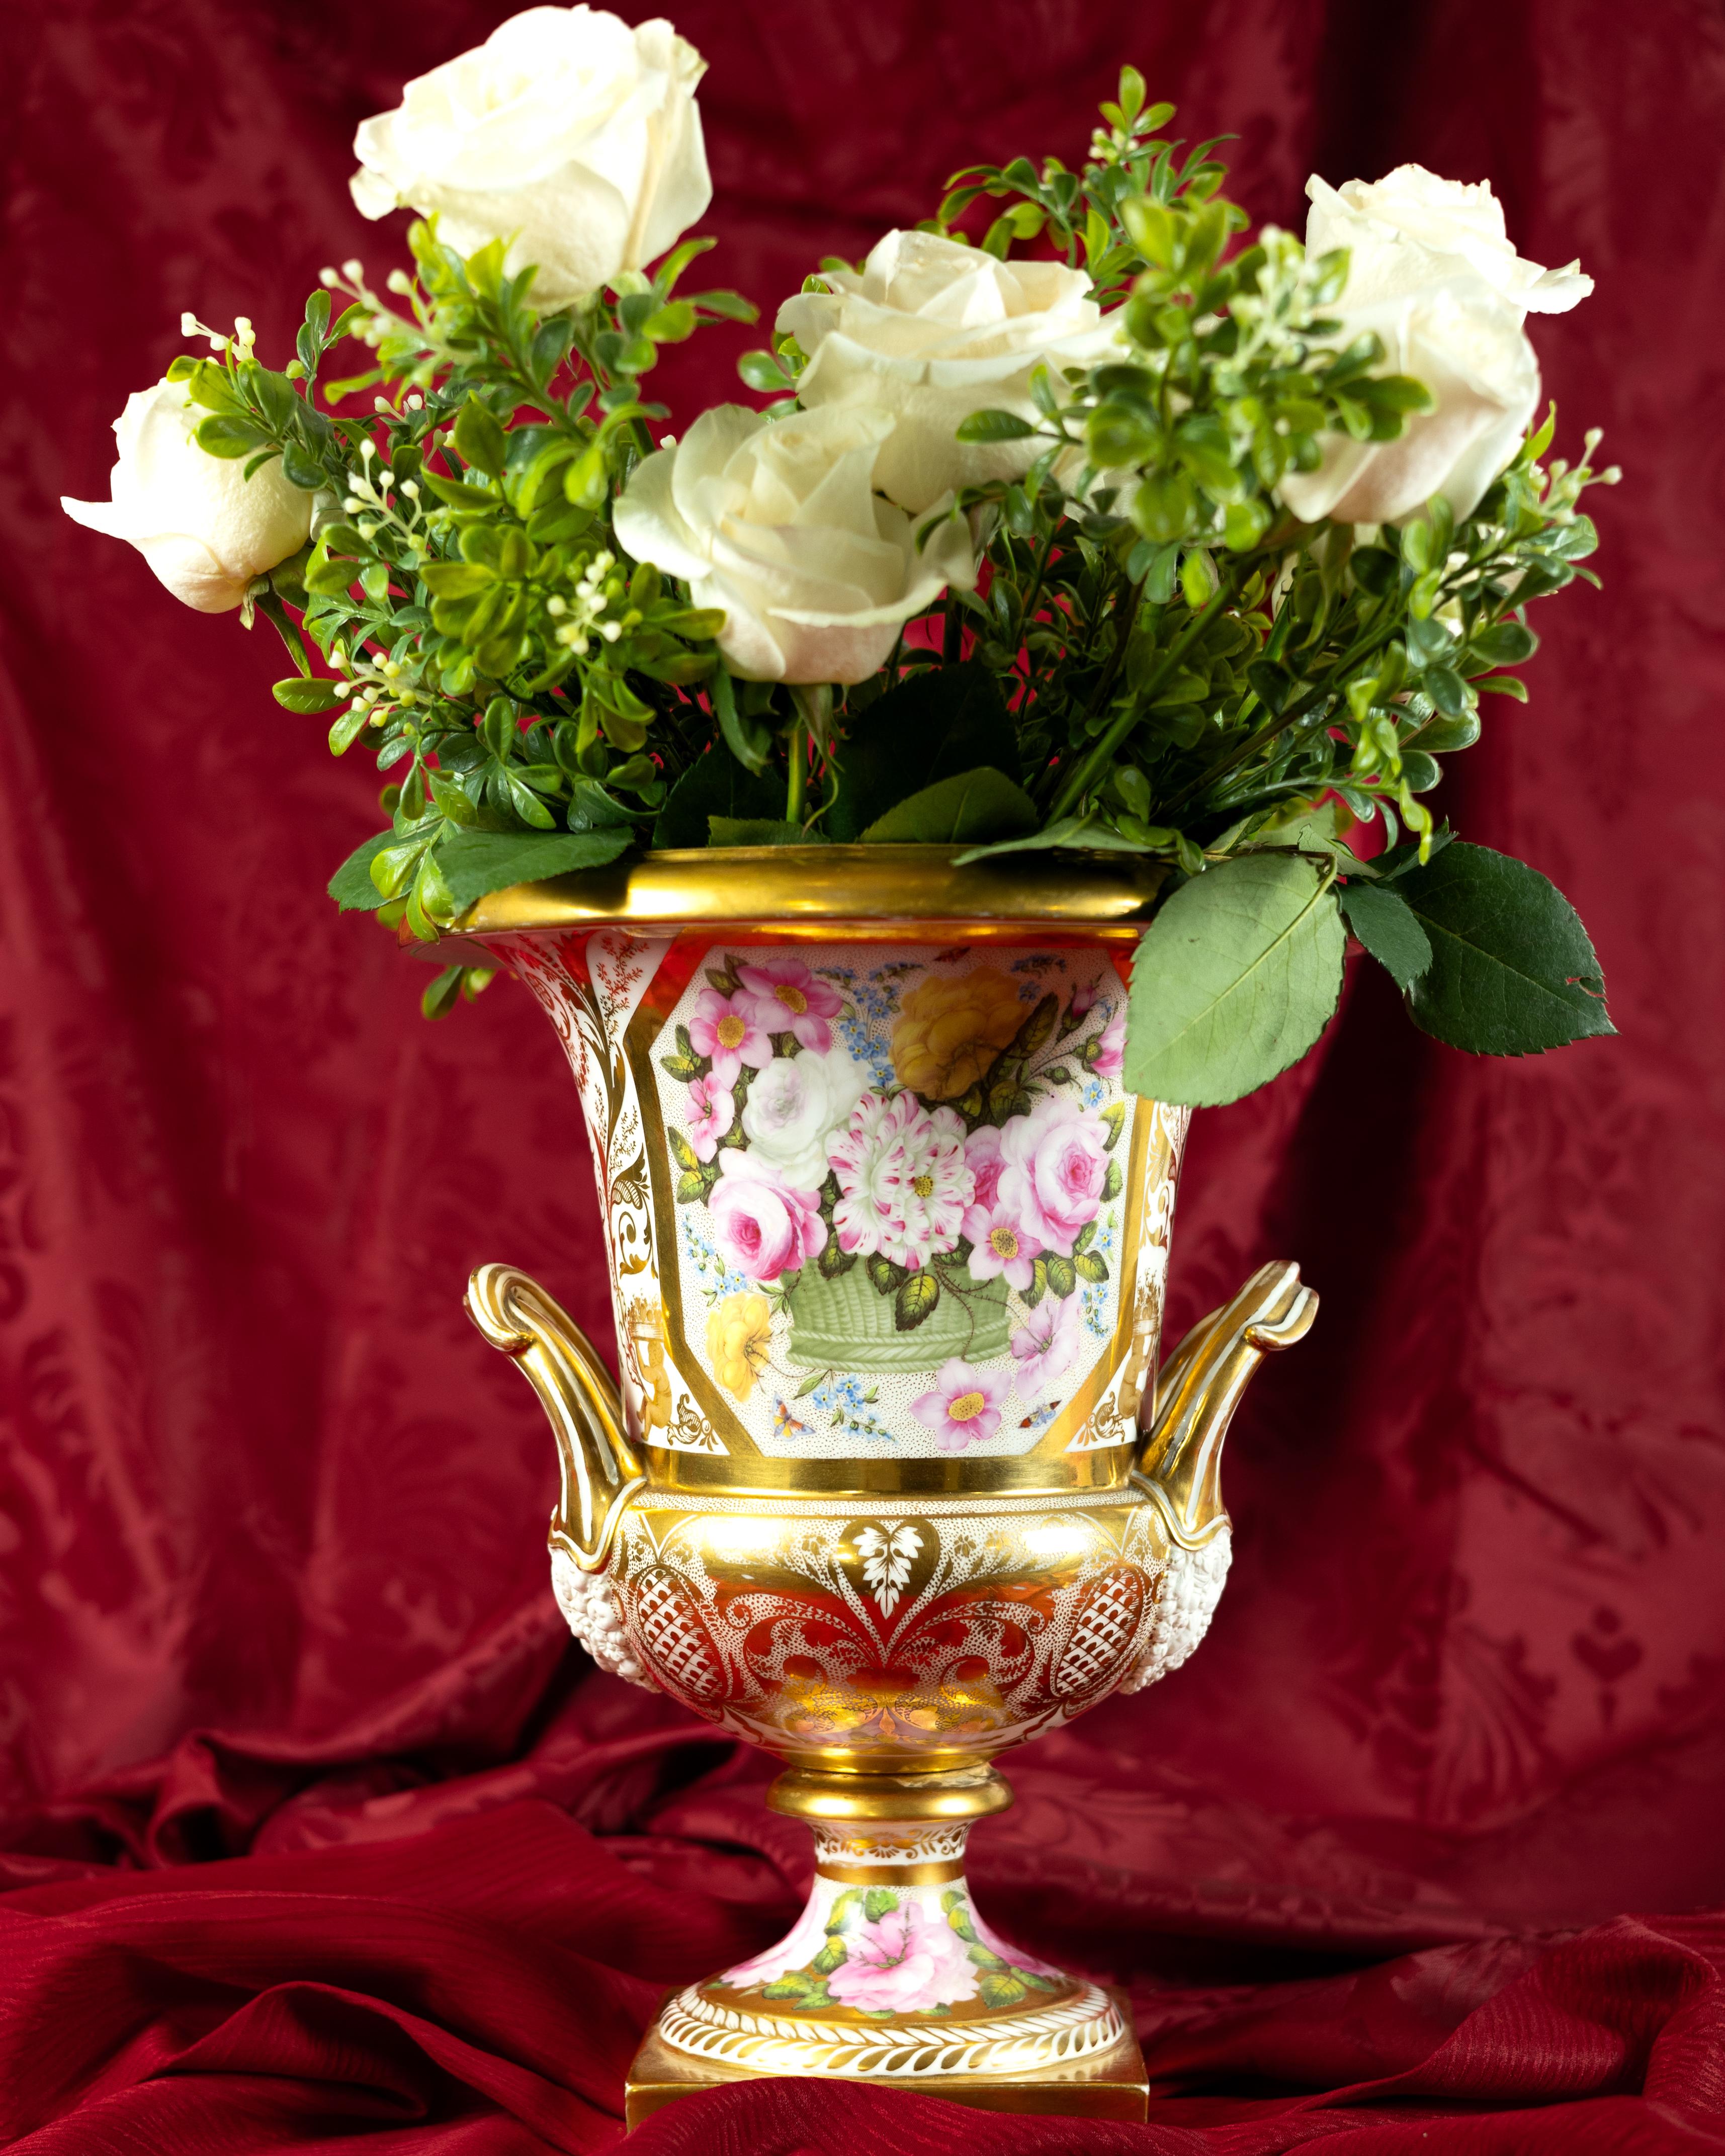  This significant Regency period campana-shaped urn is finely painted with fabulous pink and yellow roses and small blue forget-me-nots overflowing from a green basket. 
The reverse shows beautiful pink roses (see image #2).  
The elaborate and